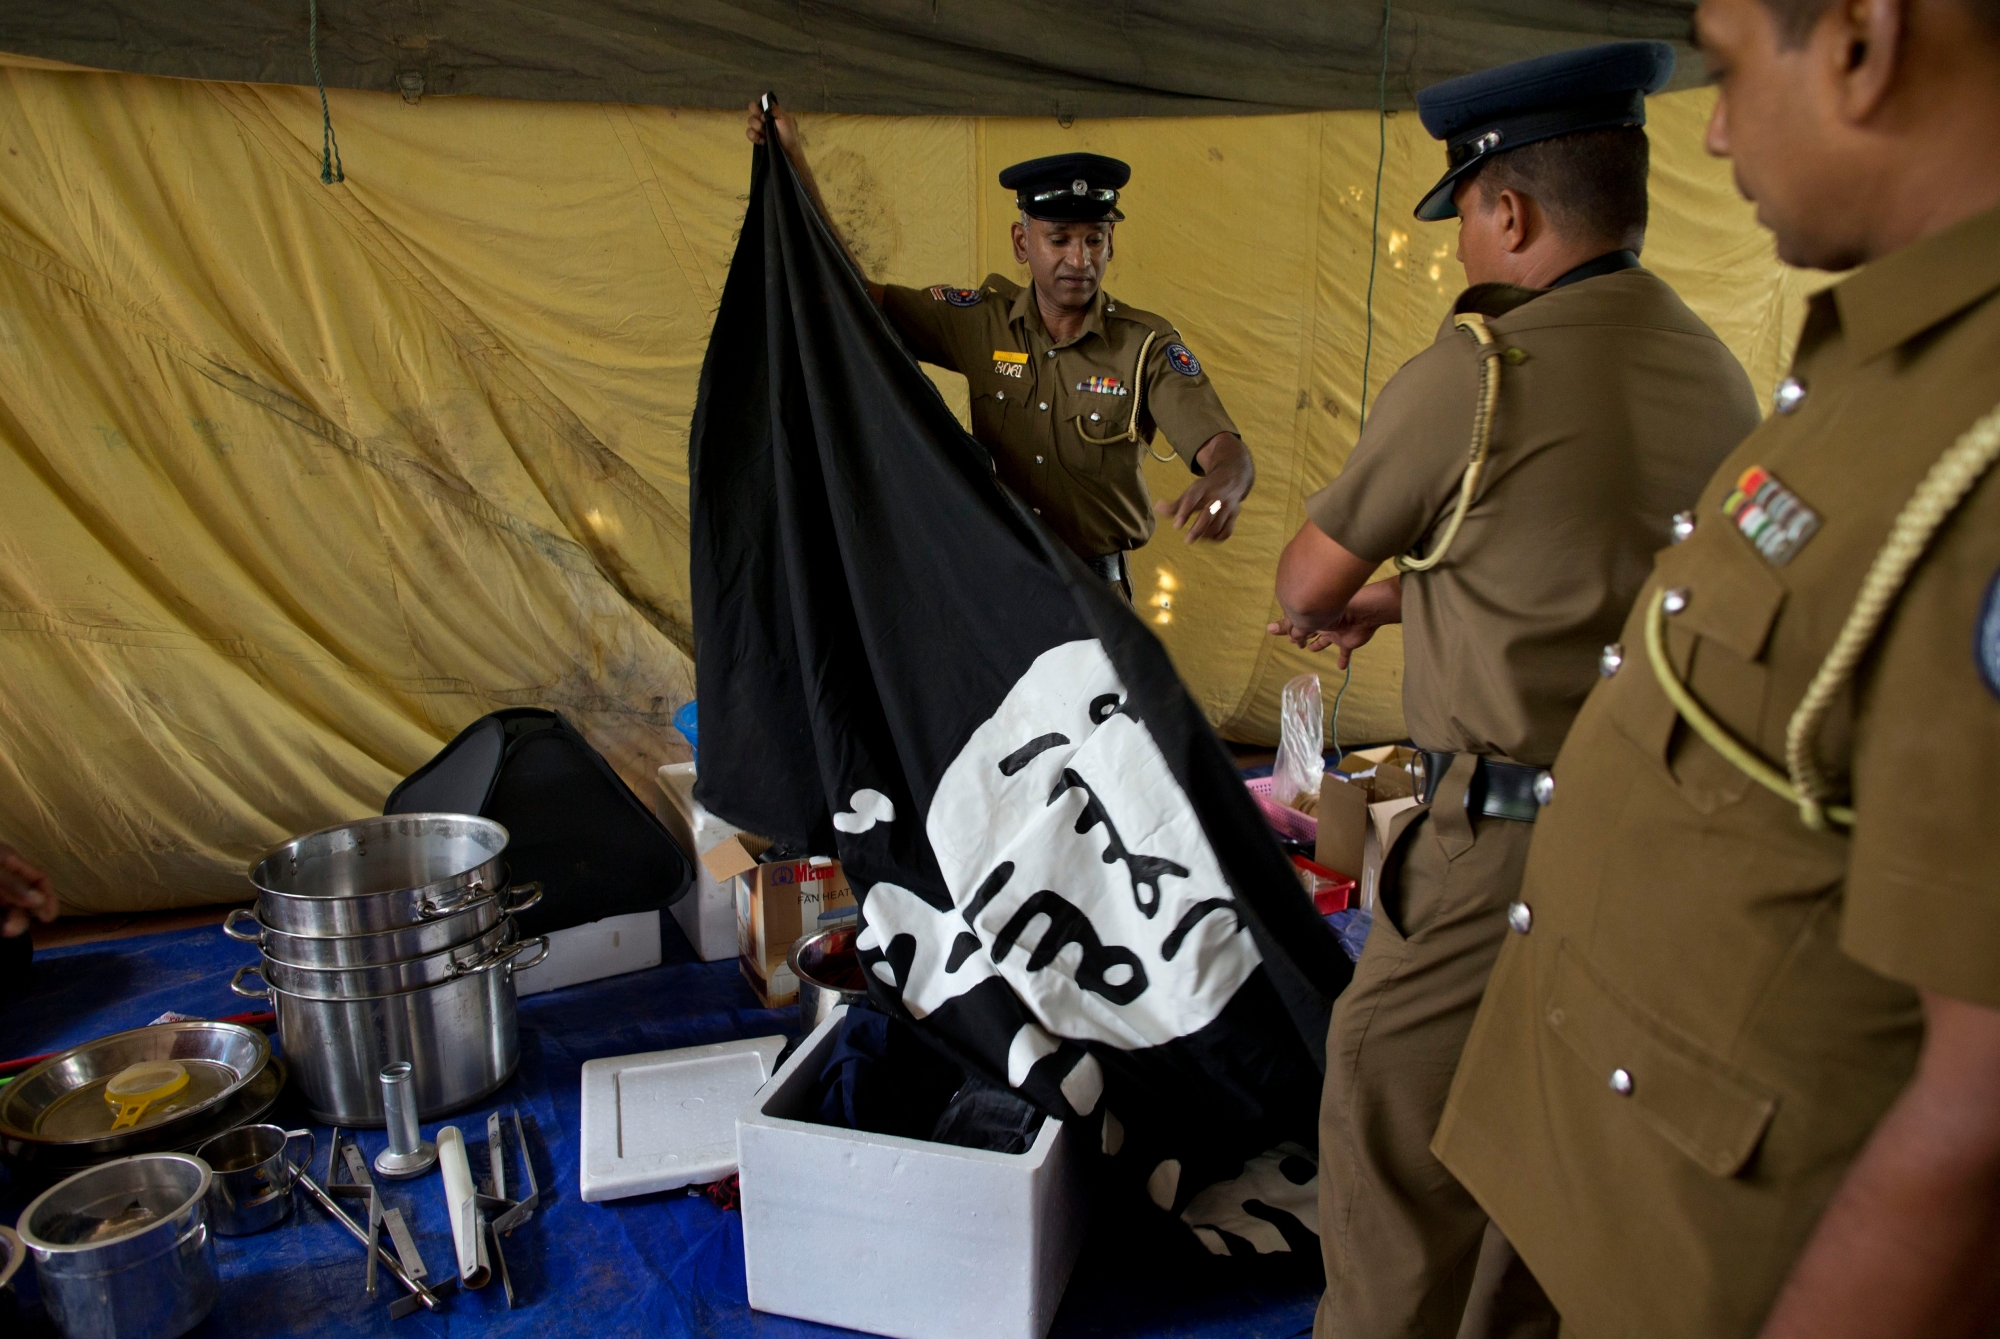 Police officers display a flag in Arabic that reads: "There is no god, but Allah" and "Of Allah is the Prophet, Muhammad" in Ampara, Sri Lanka, Sunday, April 28, 2019. Police in Ampara showed The Associated Press on Sunday the explosives, chemicals and Islamic State flag they recovered from the site of one security force raid in the region as Sri Lanka's Catholics celebrated at televised Mass in the safety of their homes. (AP Photo/Gemunu Amarasinghe) Sri Lanka Blasts